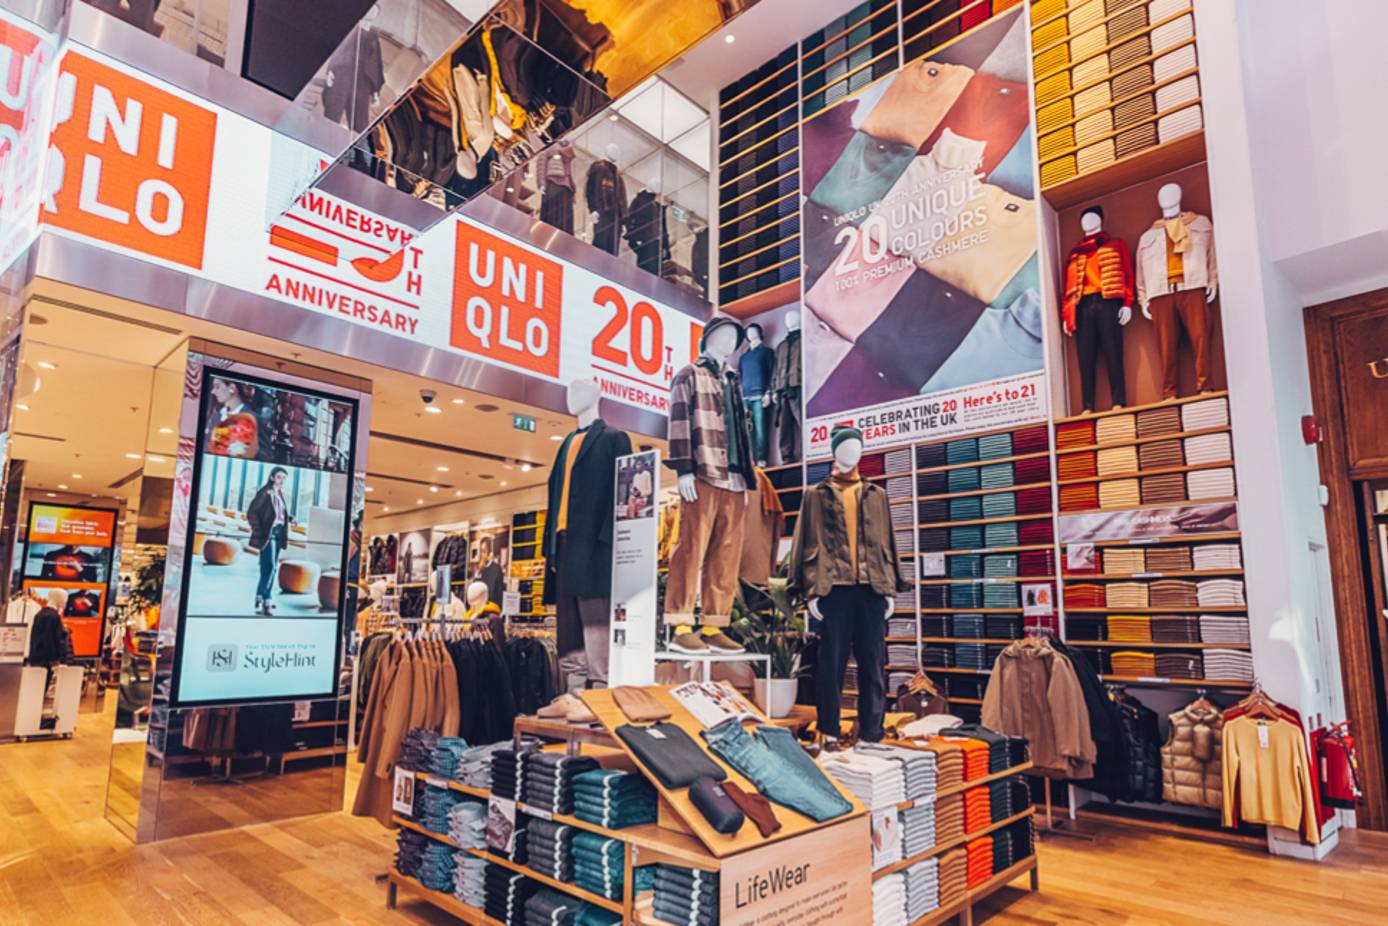 Uniqlo marks 20th anniversary in the UK with special events and partnerships